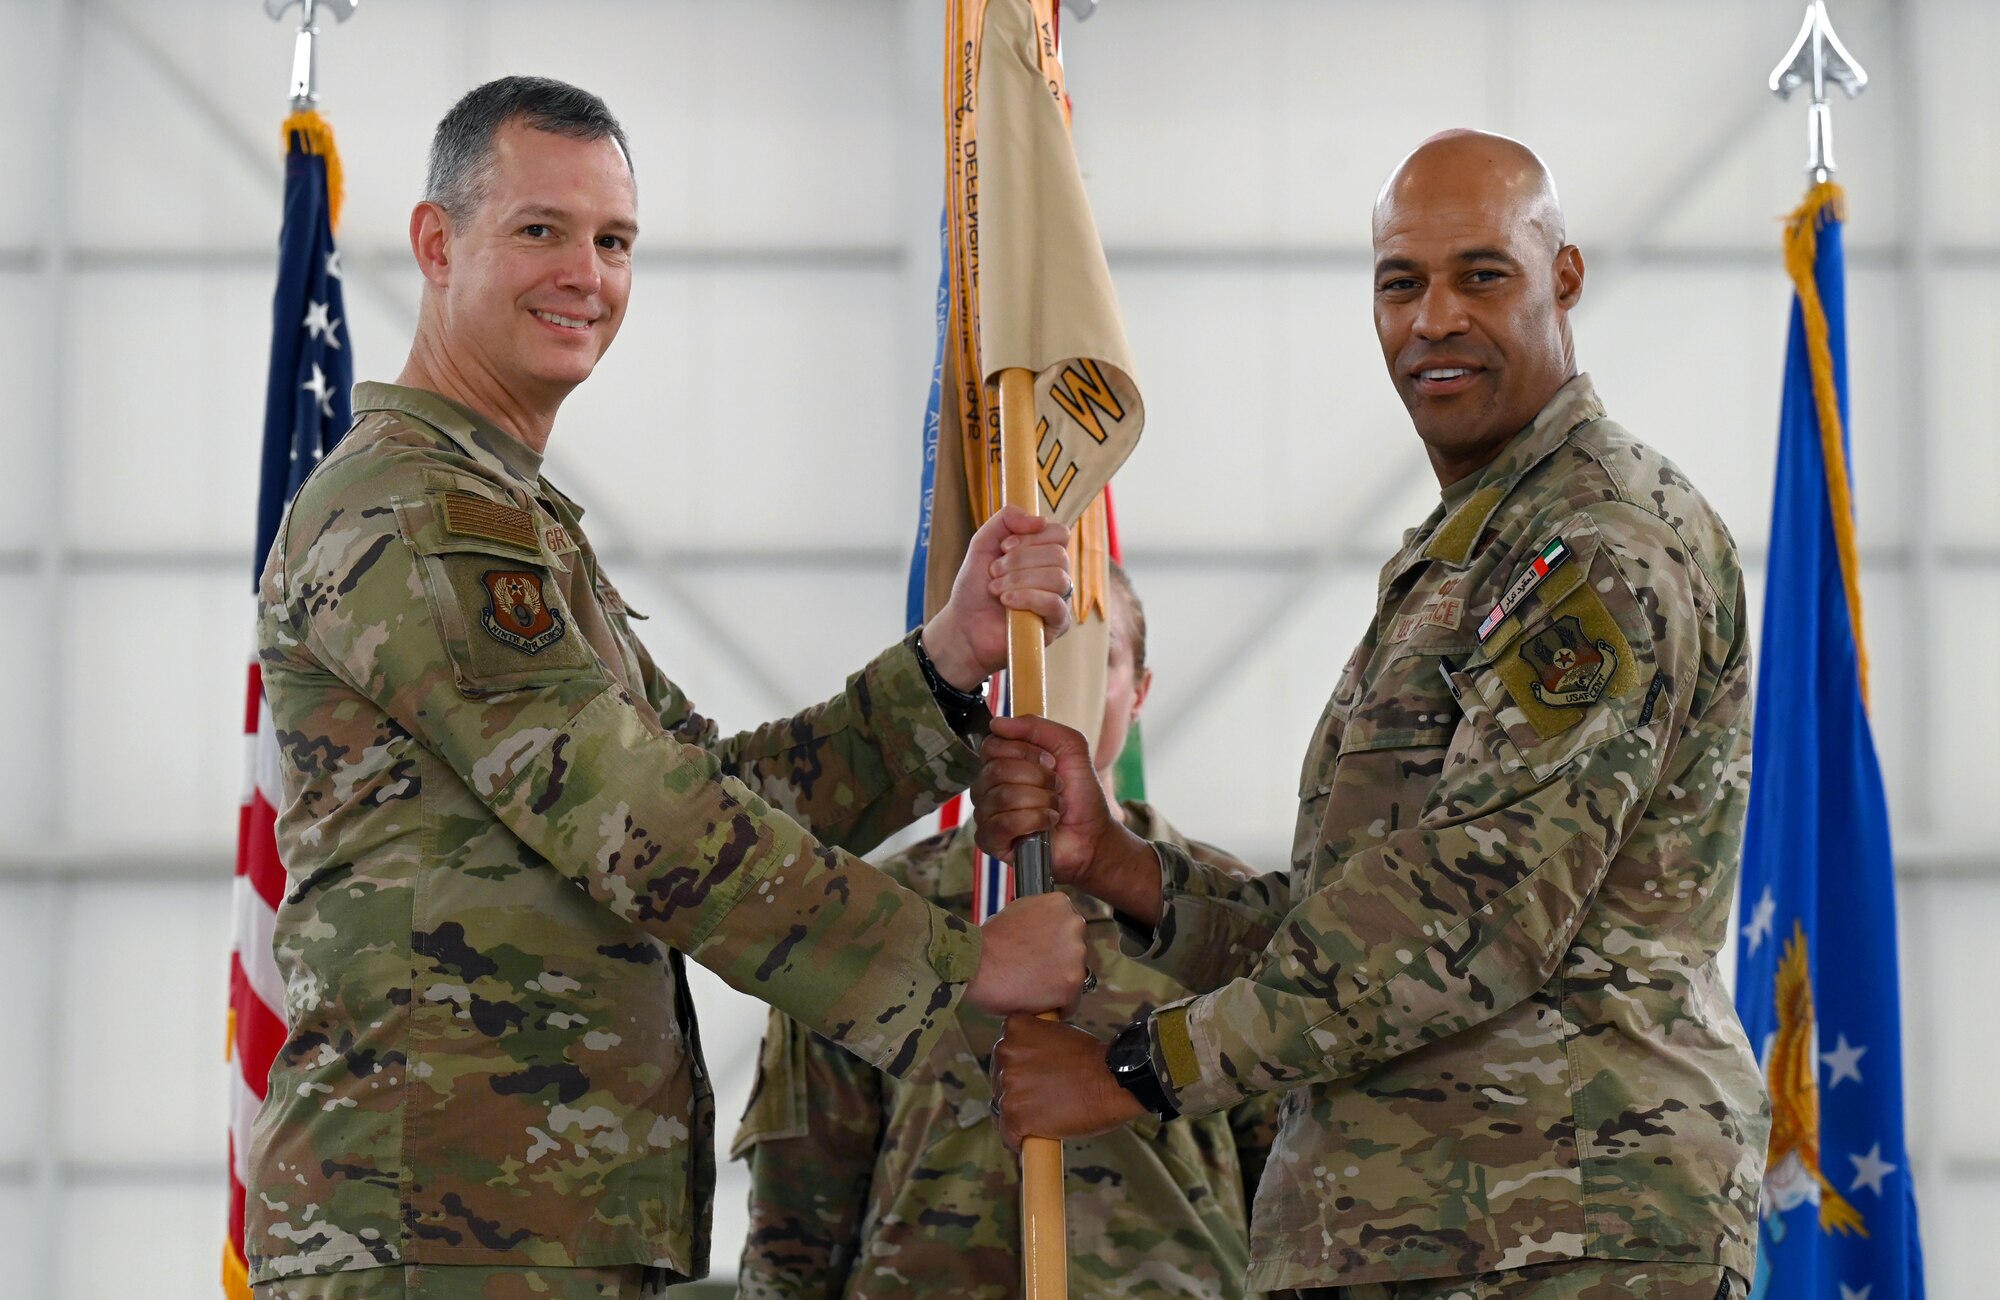 A photo of two people on stage holding the guidon.